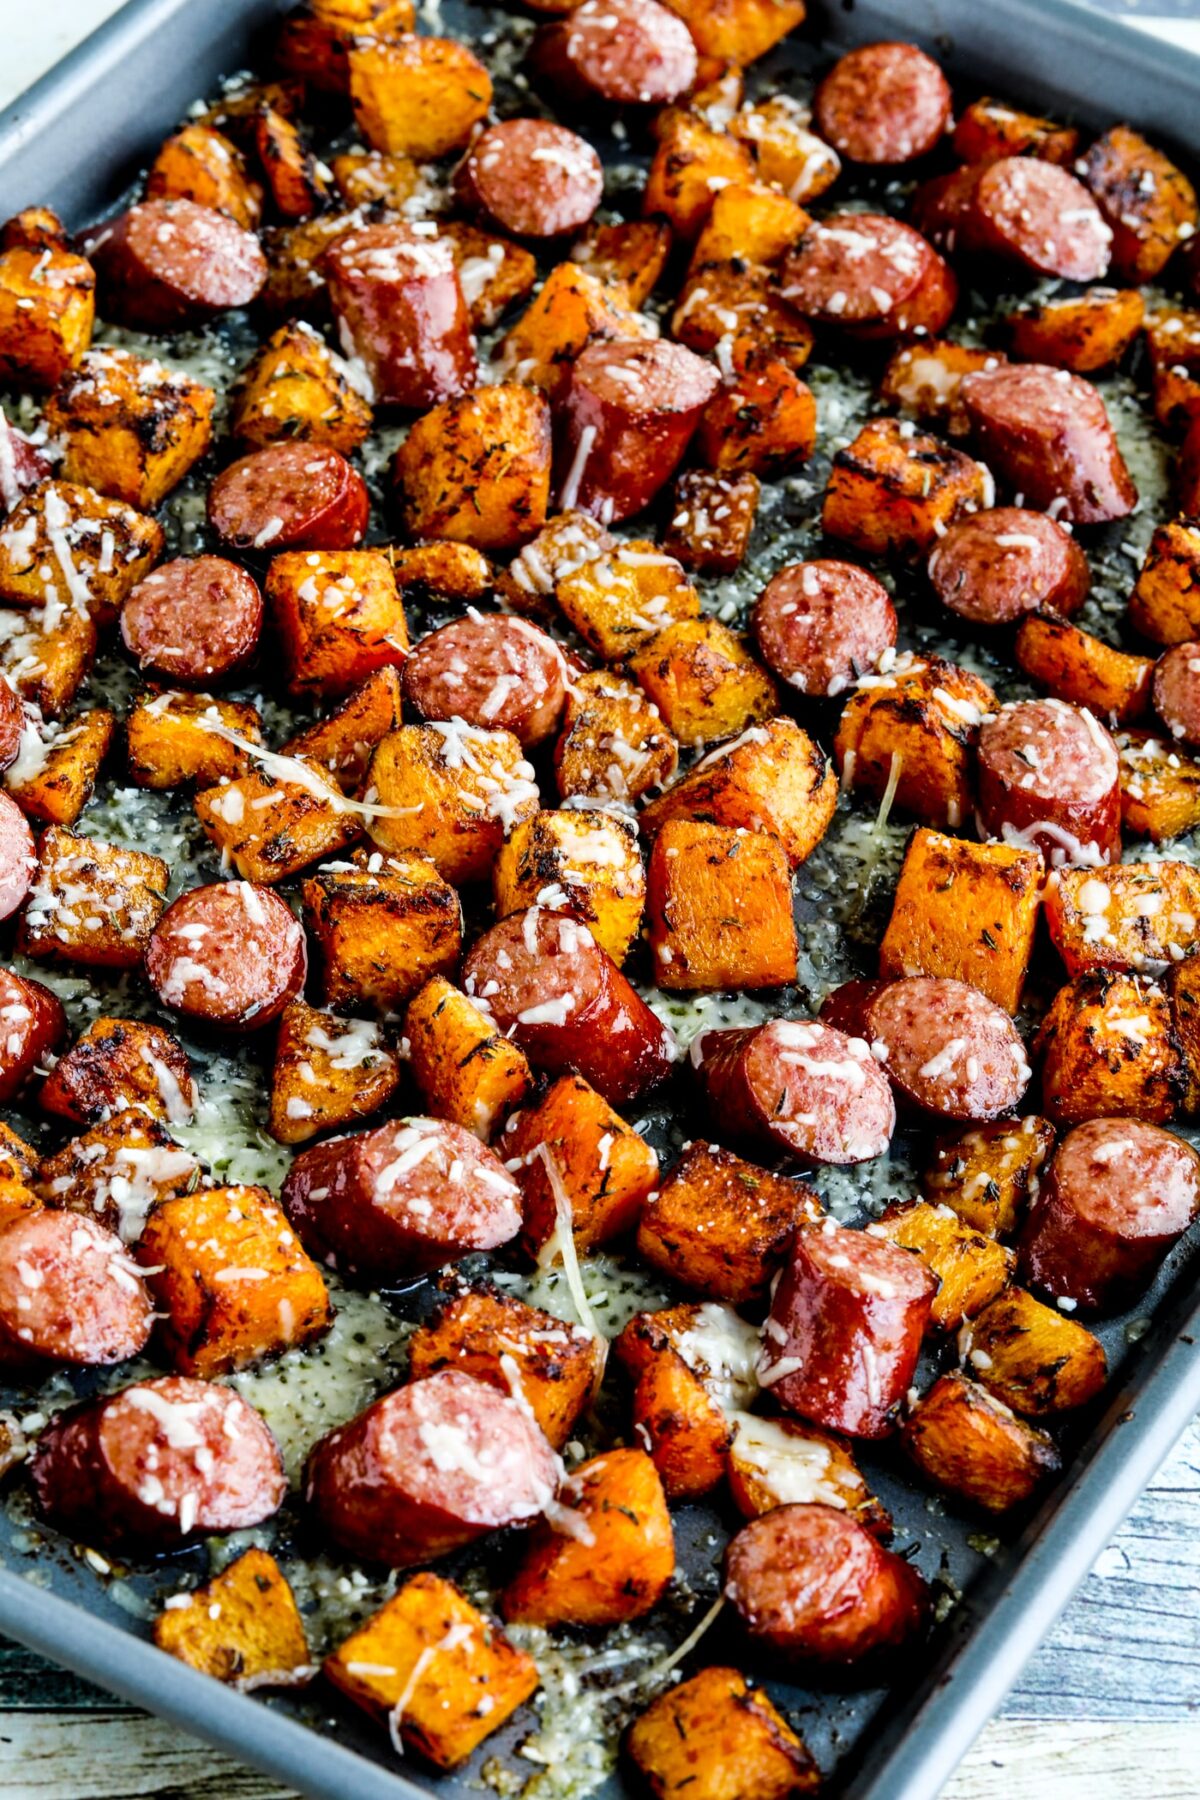 Close-up of Roasted Butternut Squash and Sausage Sheet Pan Meal shown on sheet pan